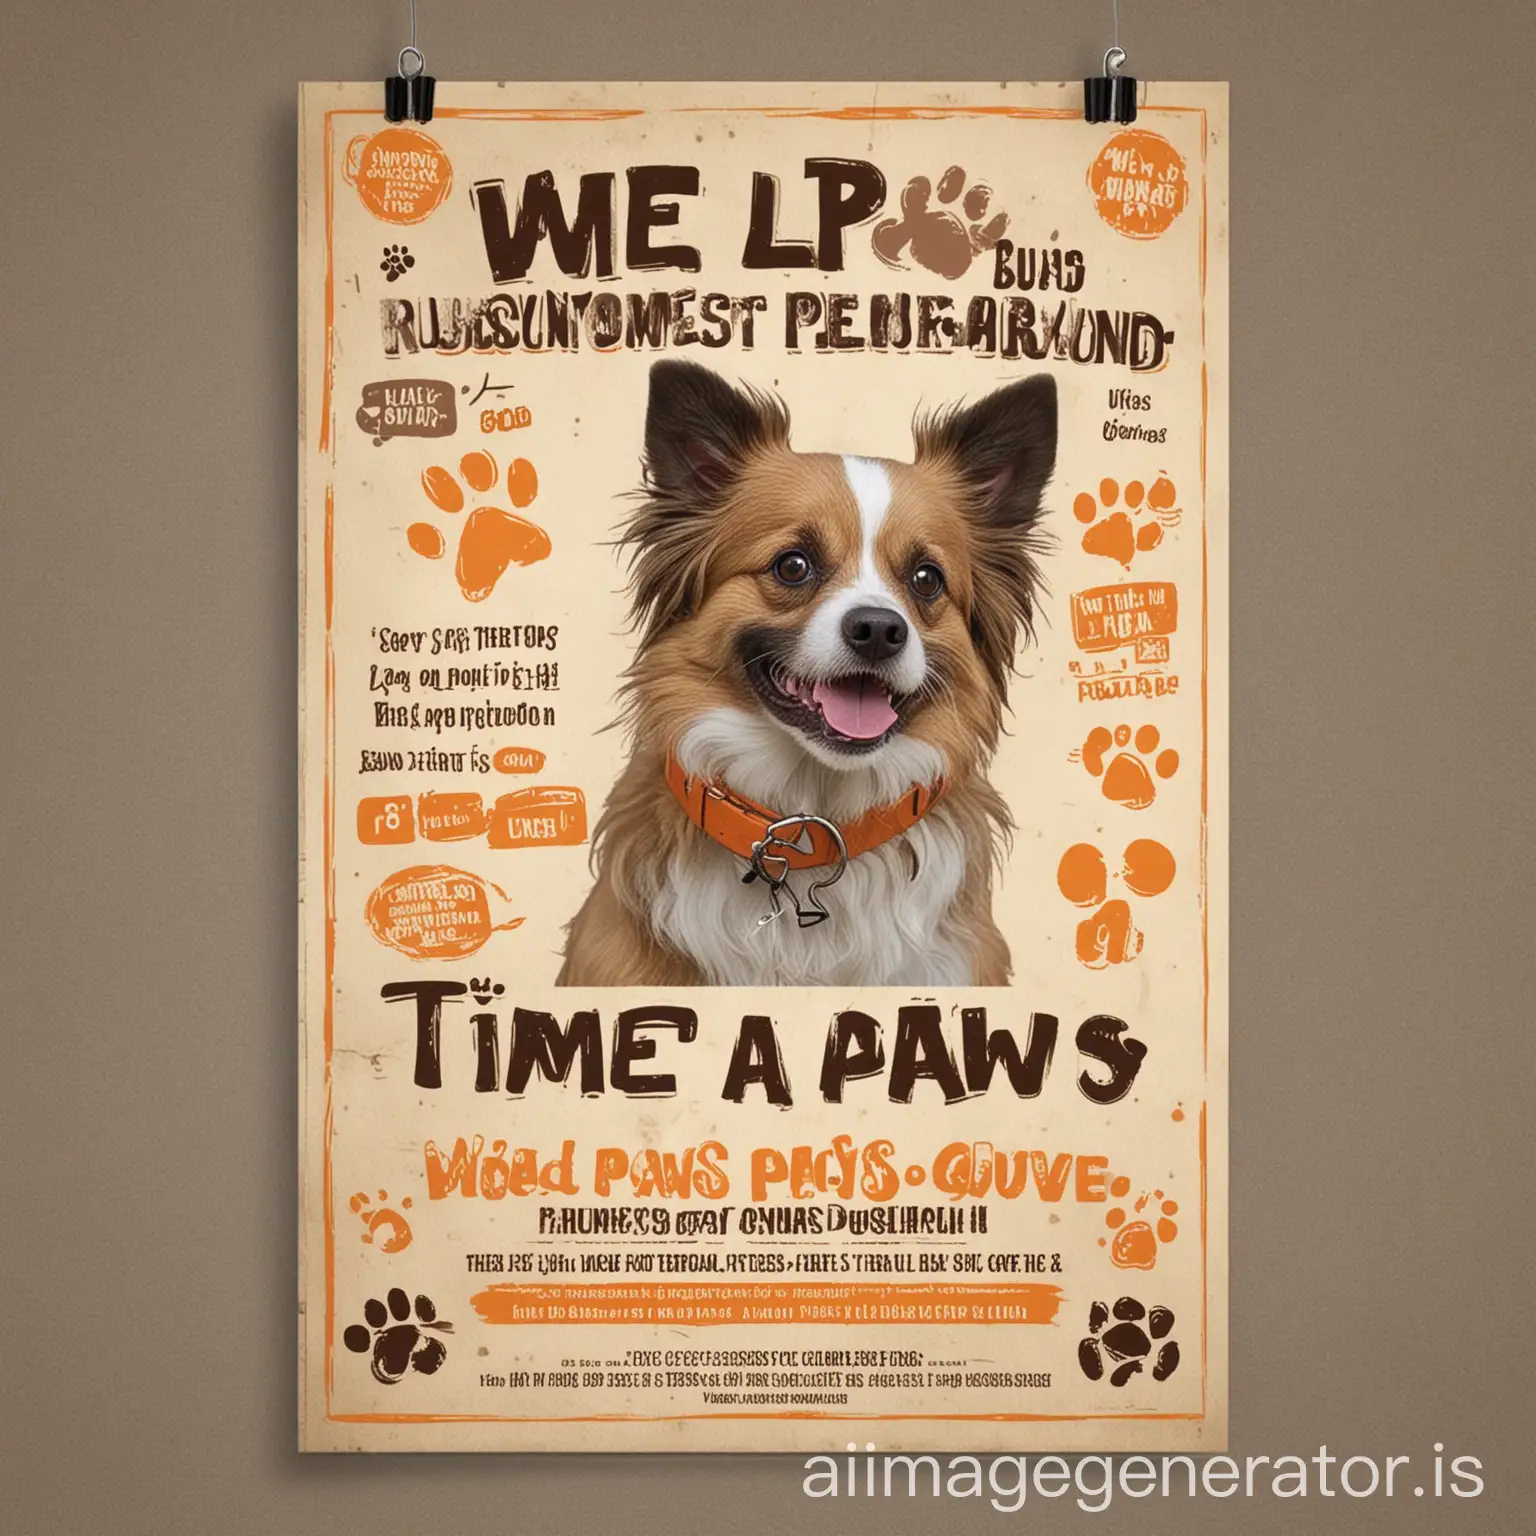 Fun-Dog-Playground-Enjoy-Quality-Time-with-Your-Canine-Companion-at-Time-Paws